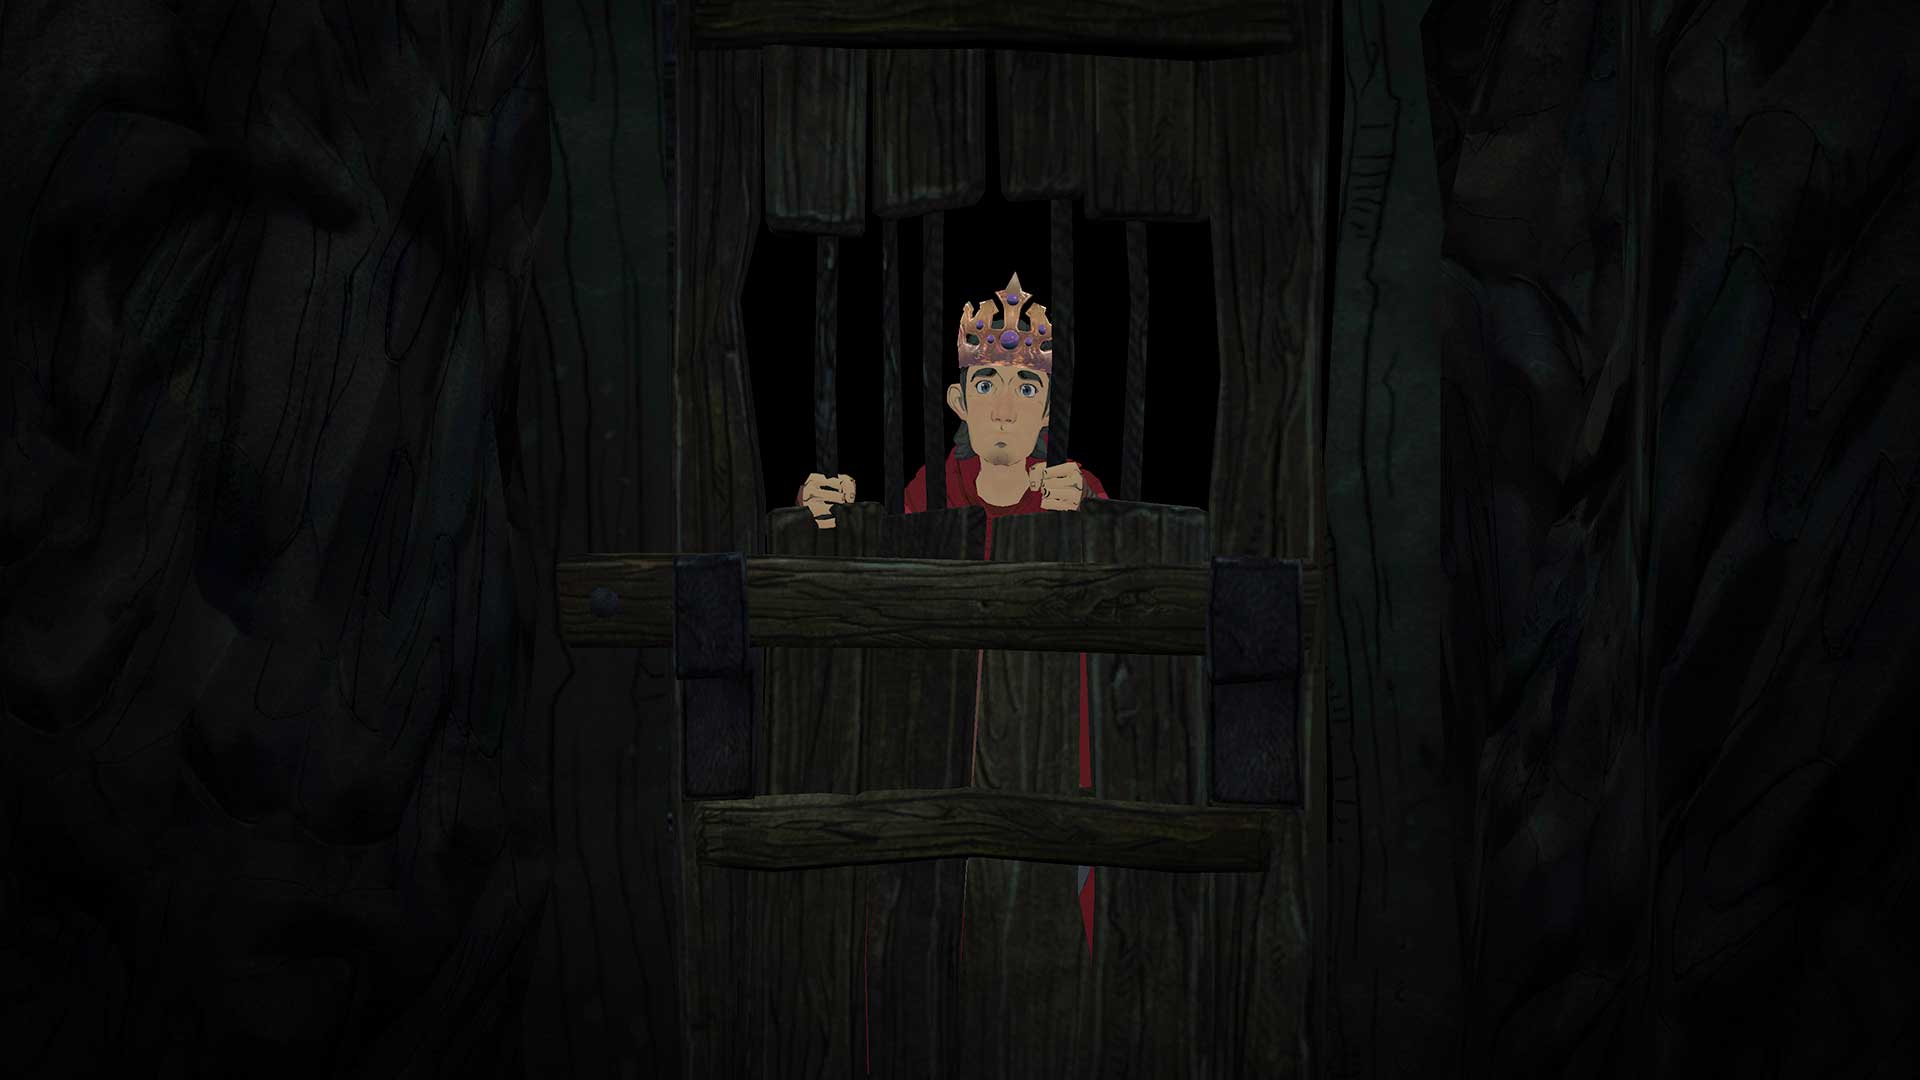 New chapter 2. Kings Quest 2 глава. King's Quest - Chapter II: Rubble without a cause. Страшные картинки для квестов.